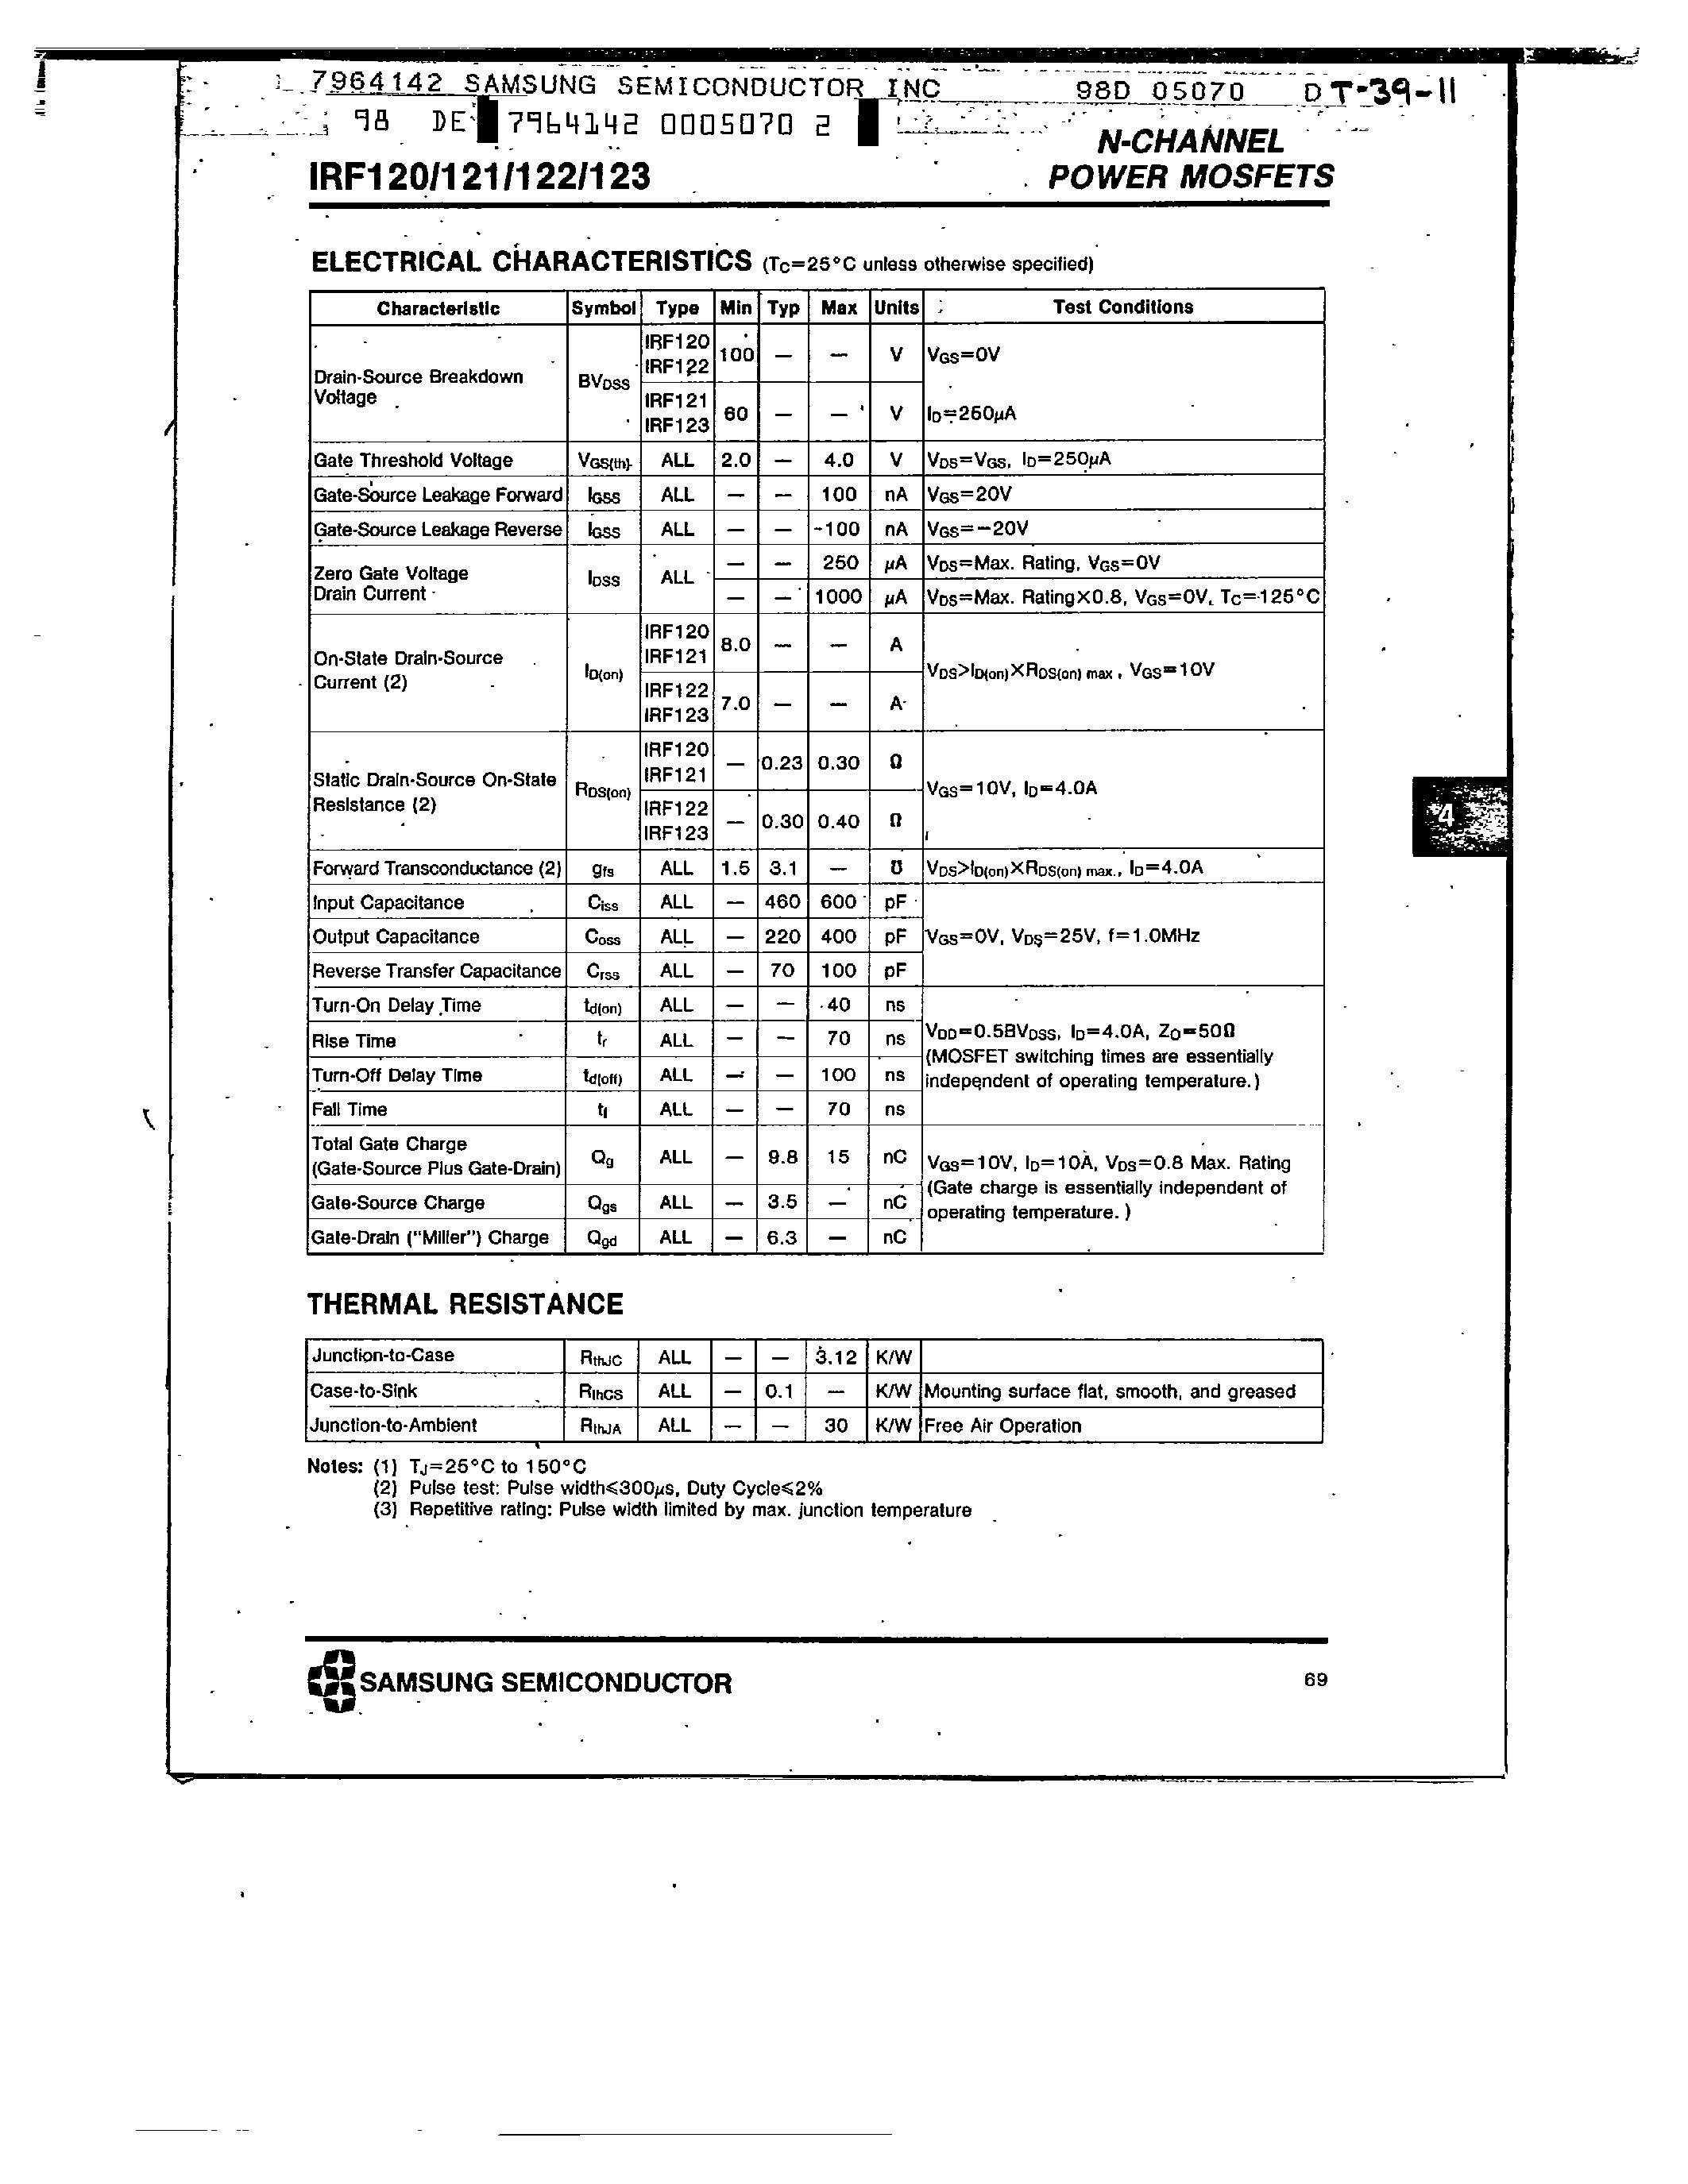 Datasheet IRF121 - N-CHANNEL POWER MOSFETS page 2